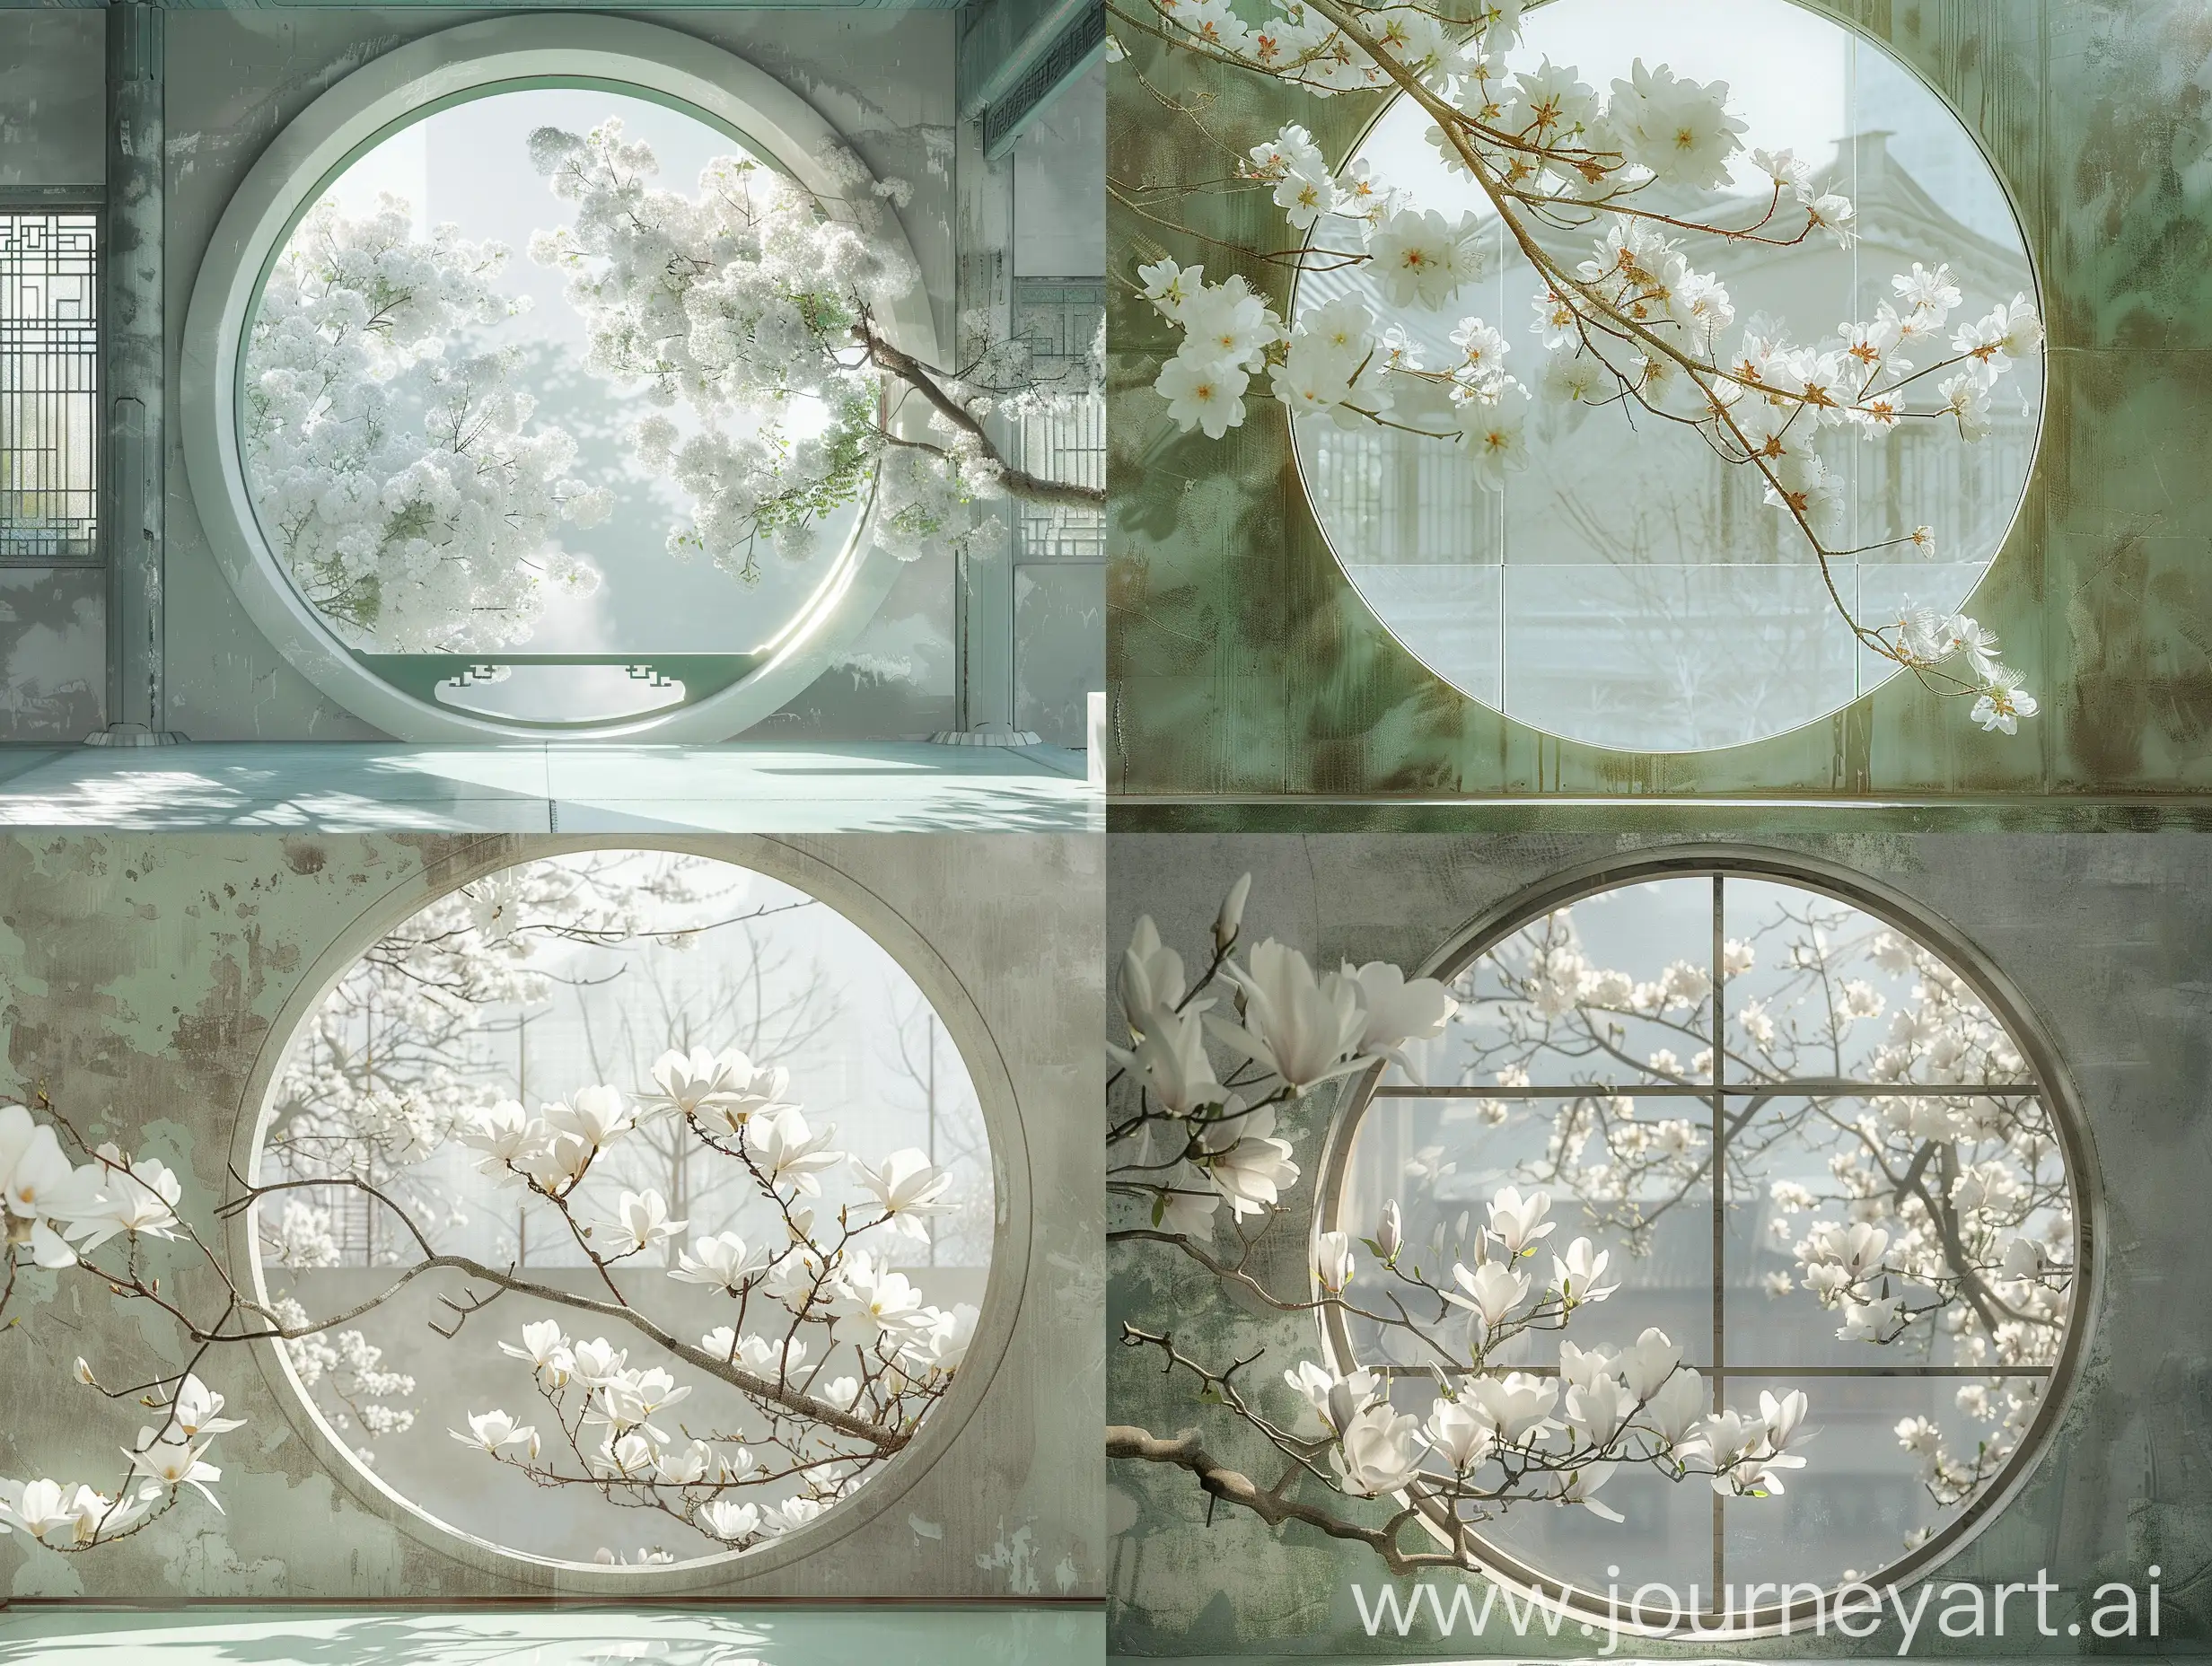 a large round window with large white blossoms, in the style of beijing east village, geometric aesthetics, zeiss ikon zm, light gray and green, functional aesthetics, medieval inspiration, meticulous attention to detail 